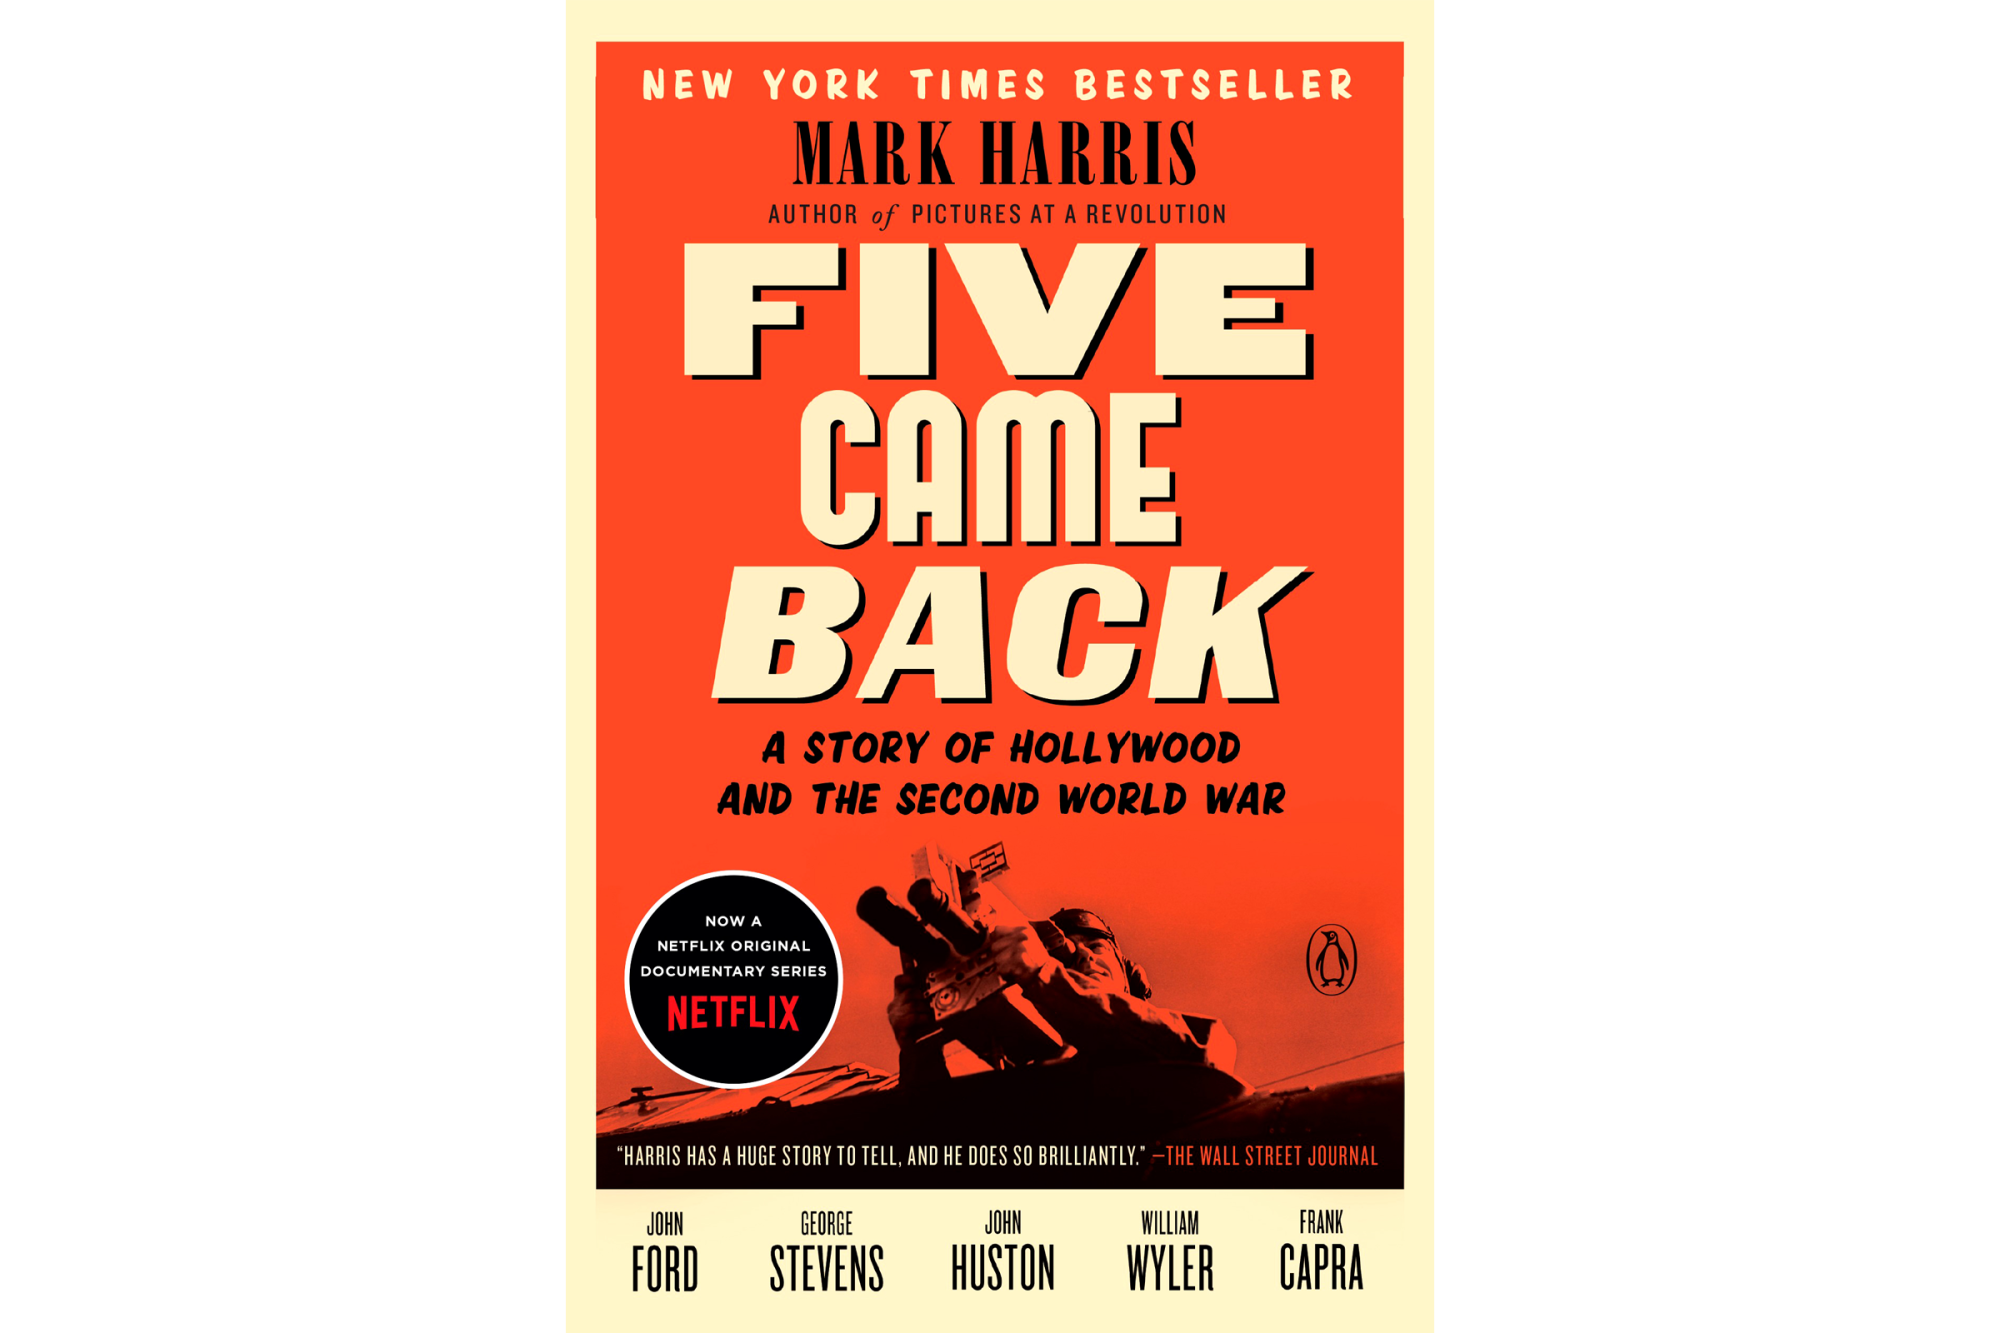 "Five Came Back: A Story of Hollywood and the Second World War" by Mark Harris